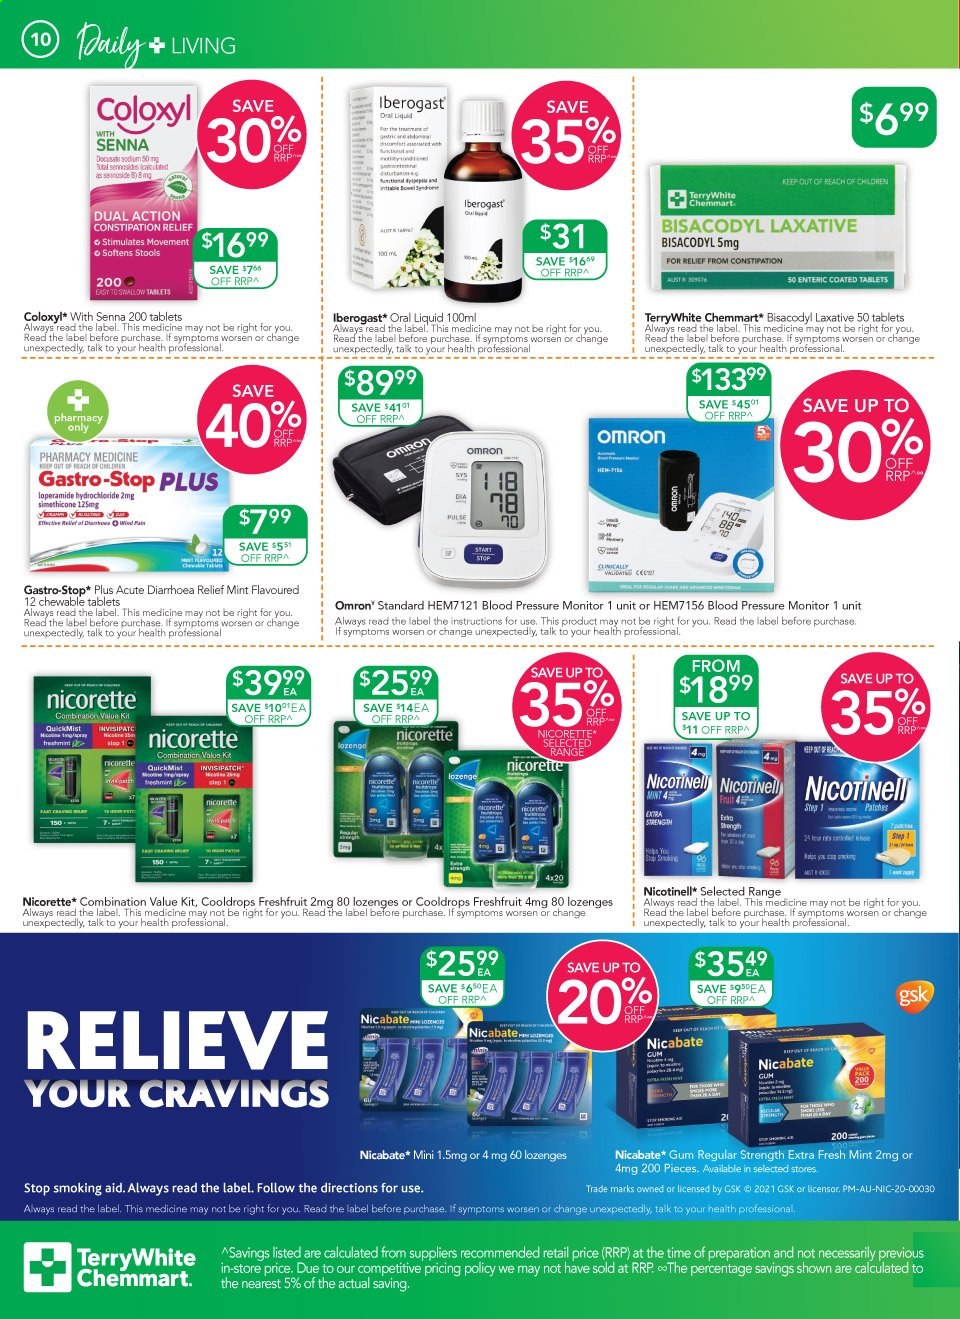 thumbnail - TerryWhite Chemmart Catalogue - 21 Jan 2021 - 9 Feb 2021 - Sales products - Nicorette, laxative, Omron. Page 10.